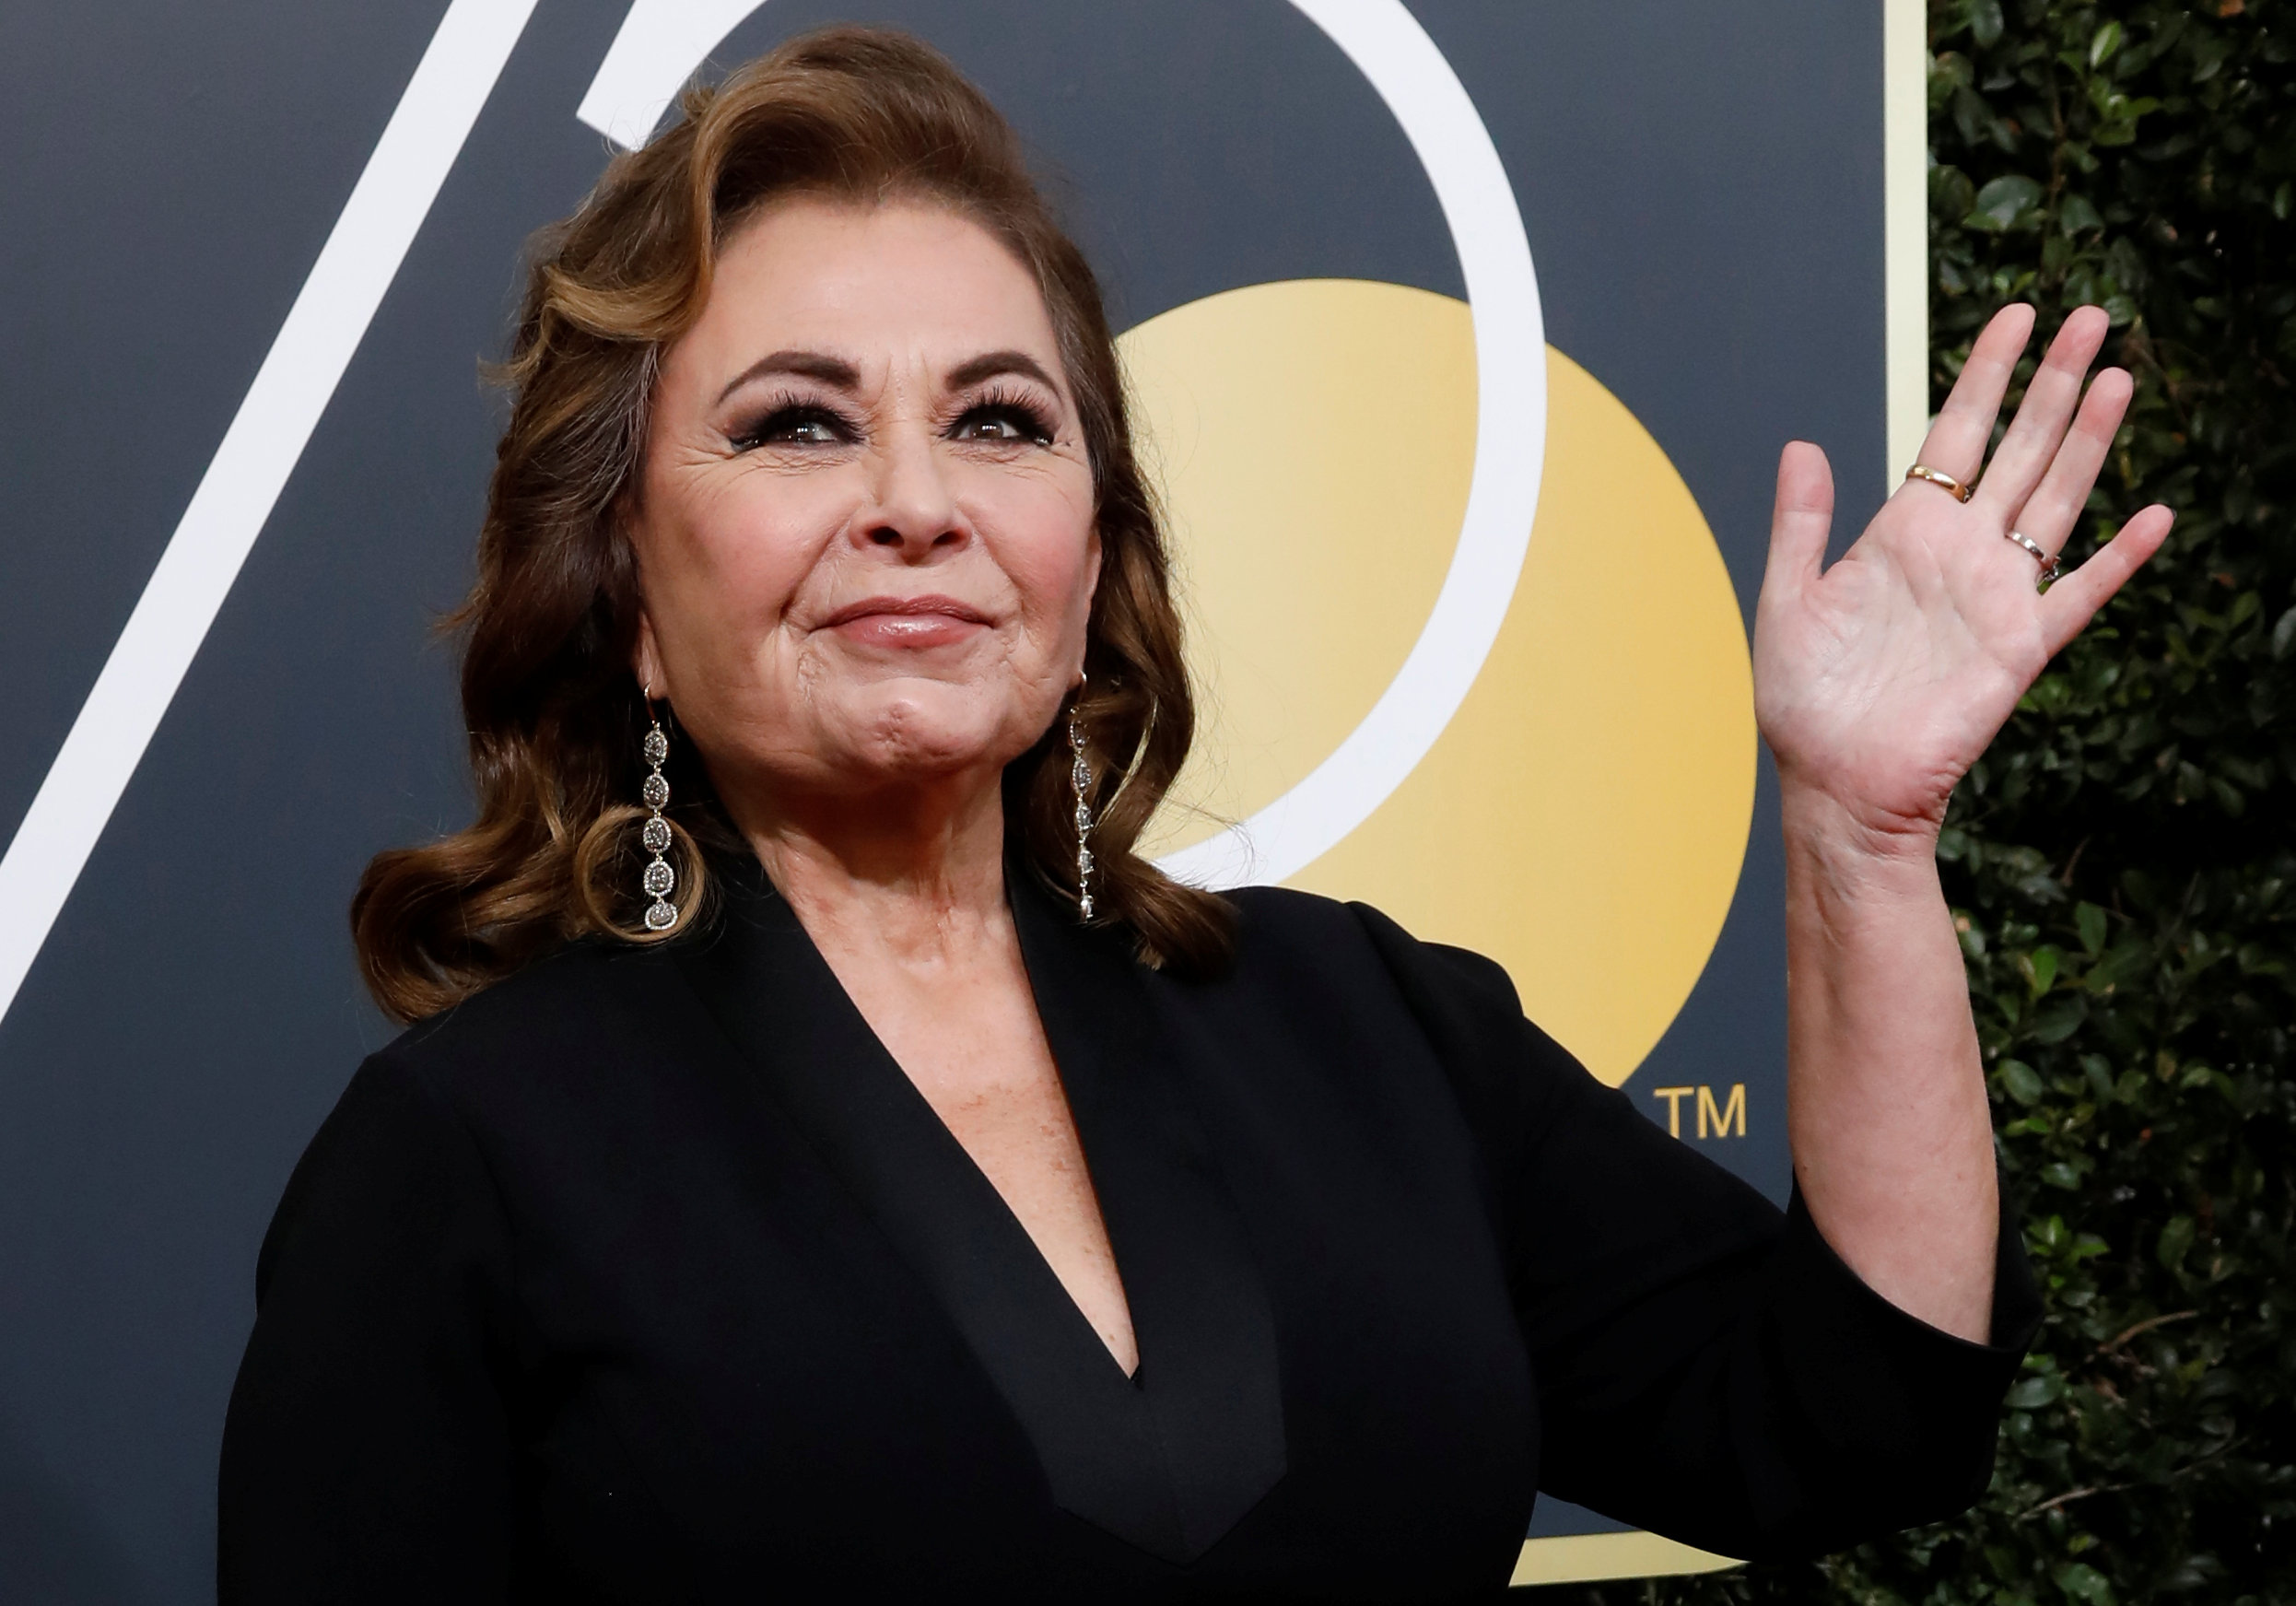 PHOTO: Roseanne Barr waves on her arrival to the 75th Golden Globe Awards in Beverly Hills, Calif., Jan. 7, 2018.